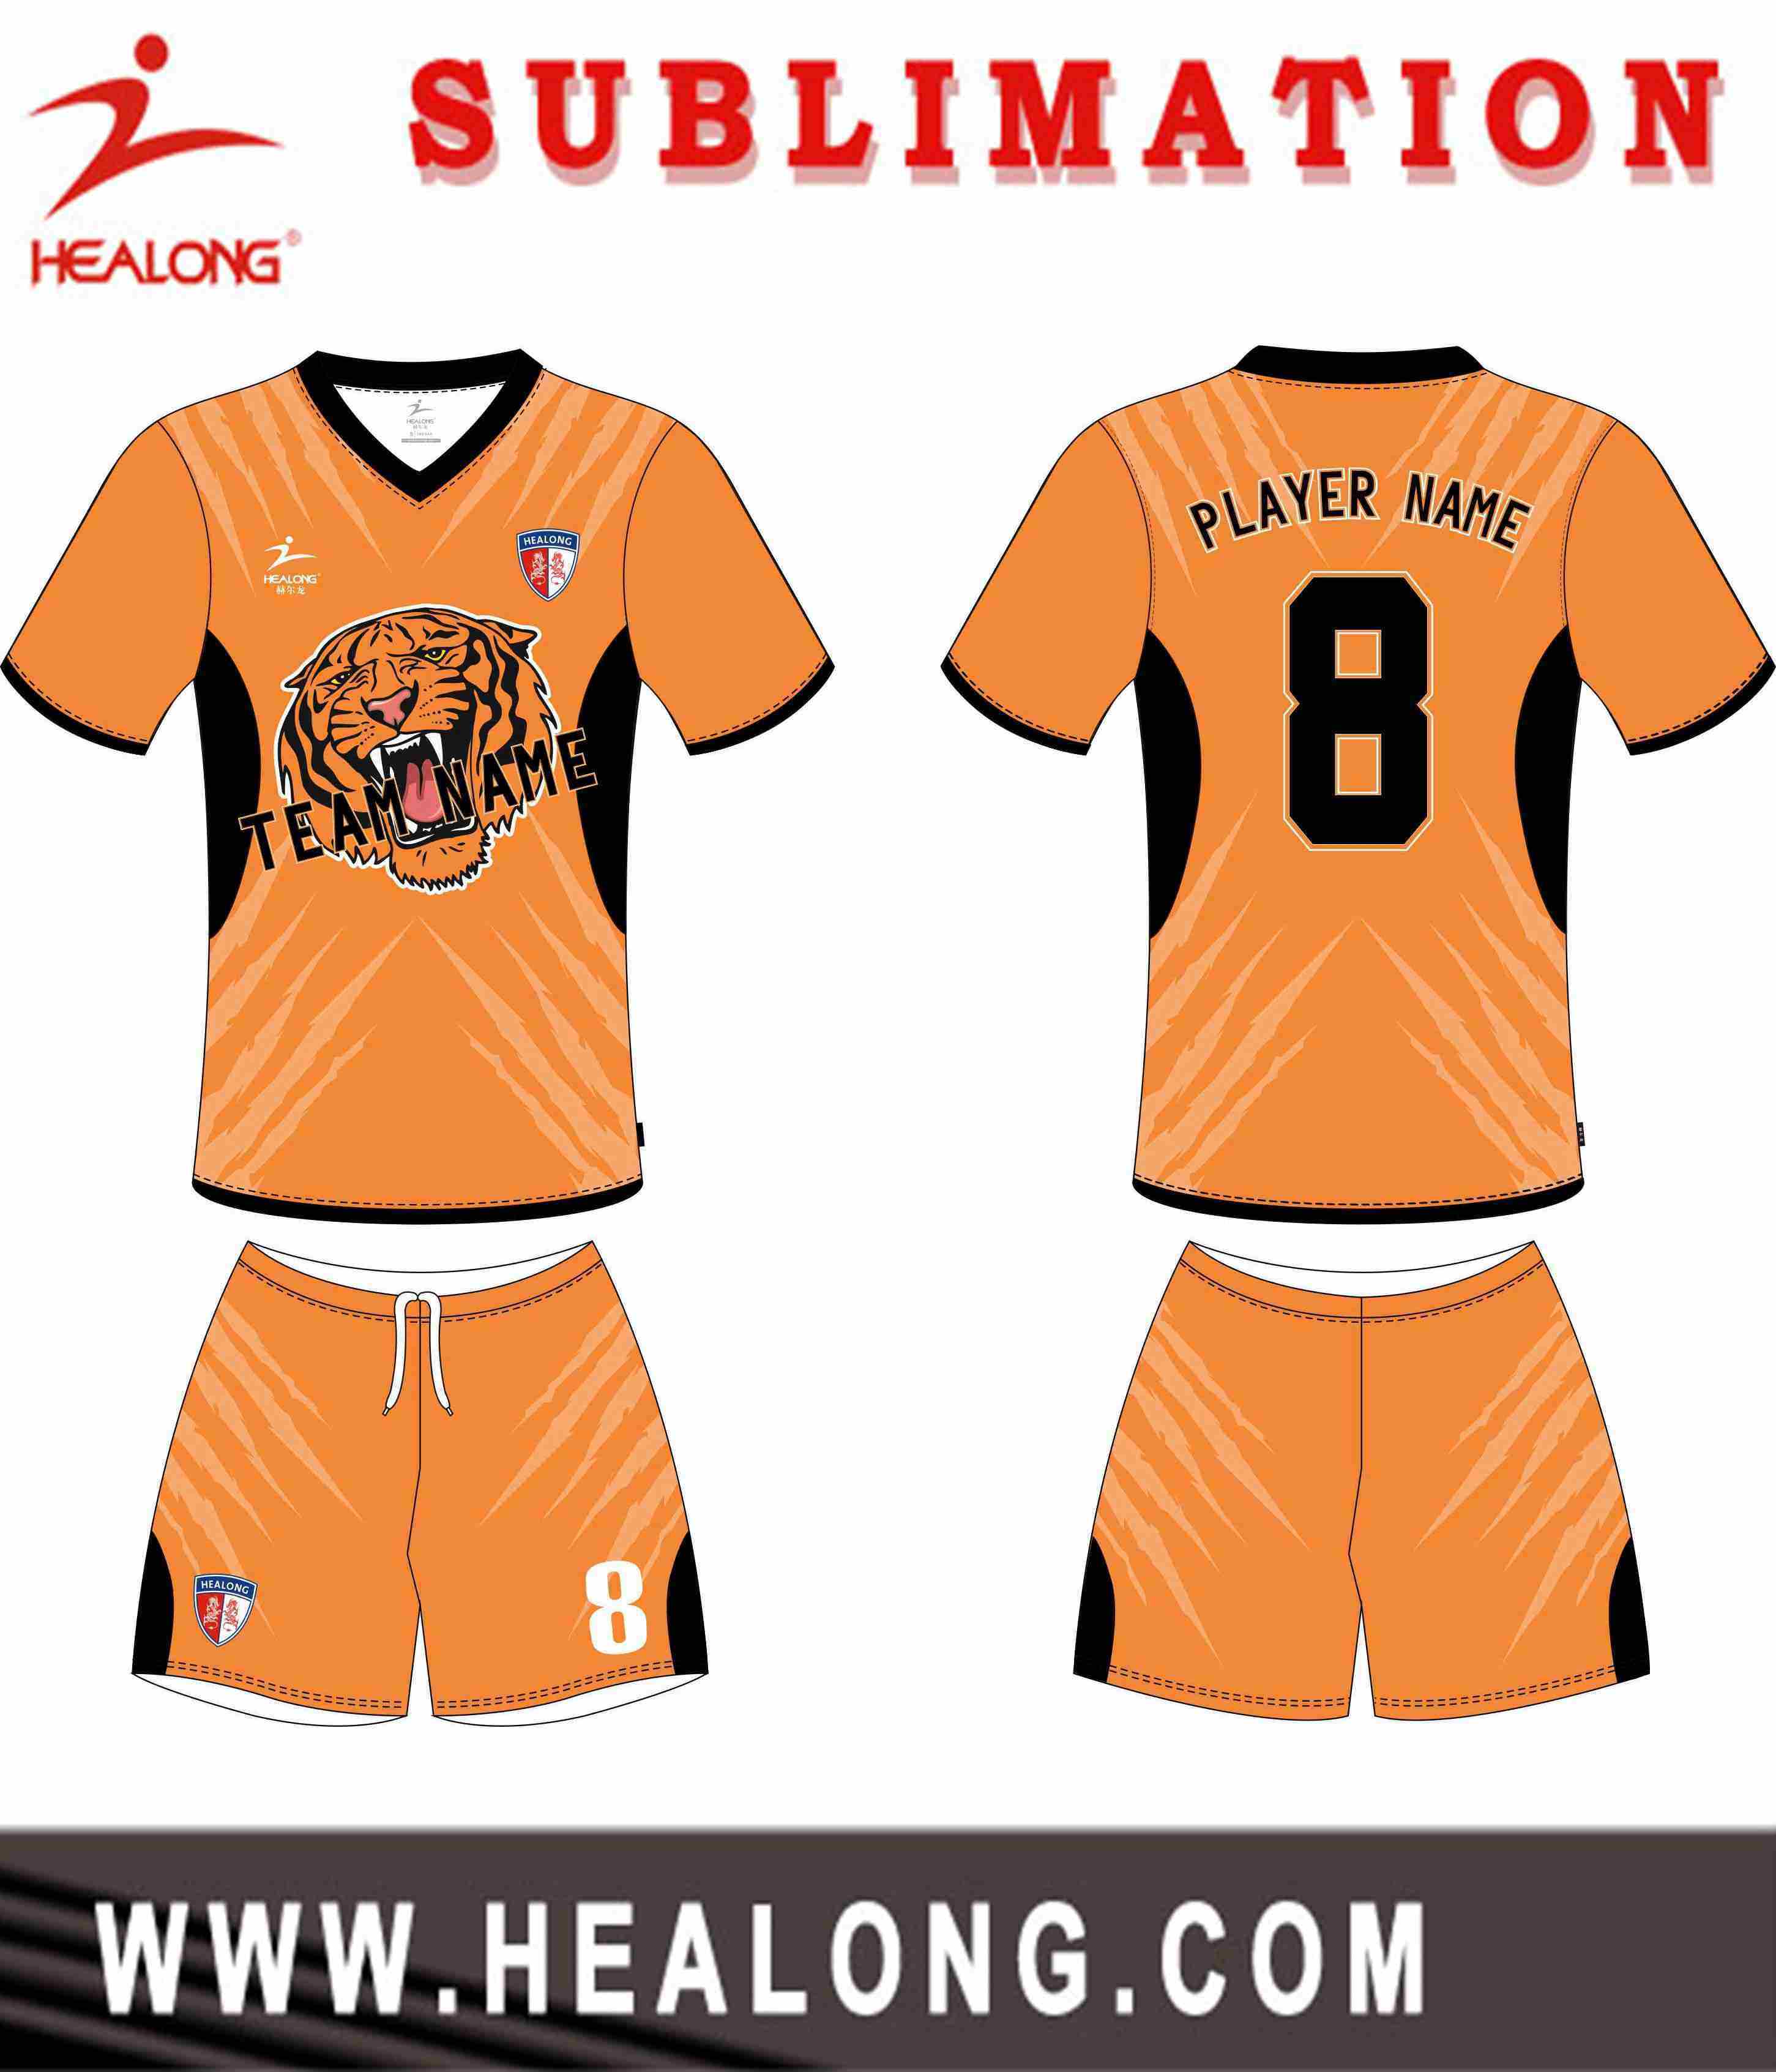 2015 New Sublimation Soccer Jersey High Quality Football Jerseys